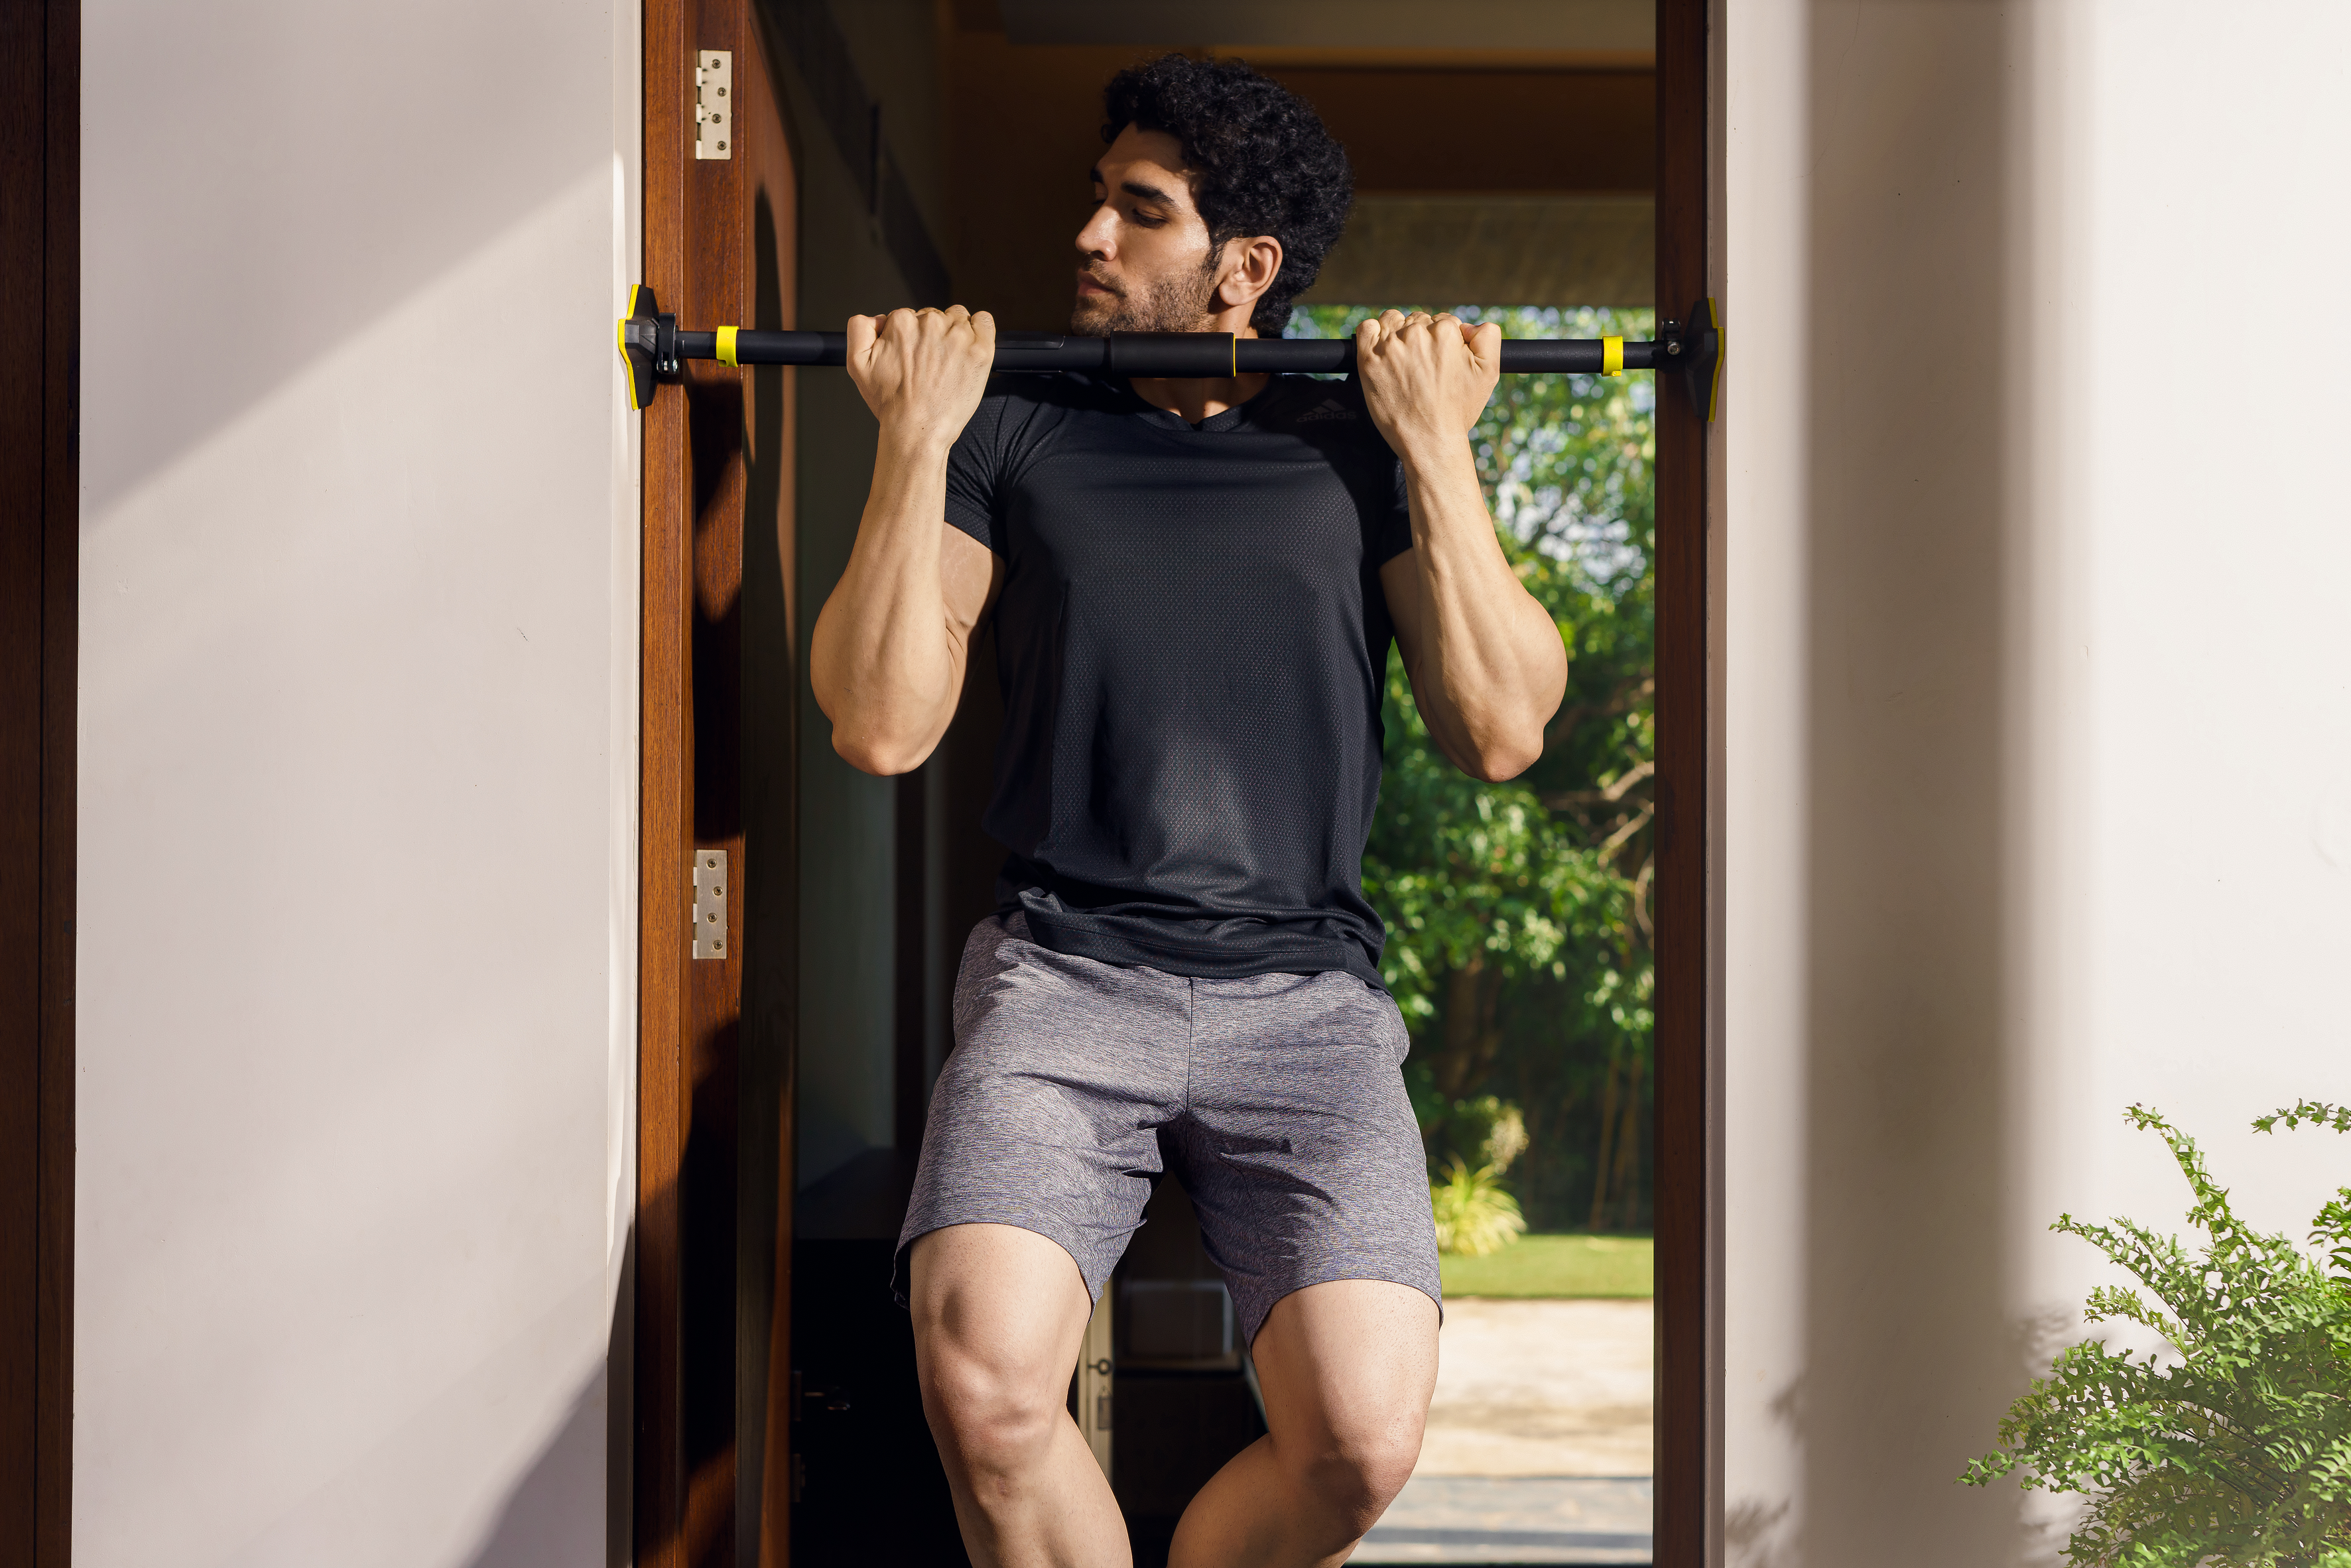 Top 6 Home Exercises for Beginners Using Pull-Up Bars